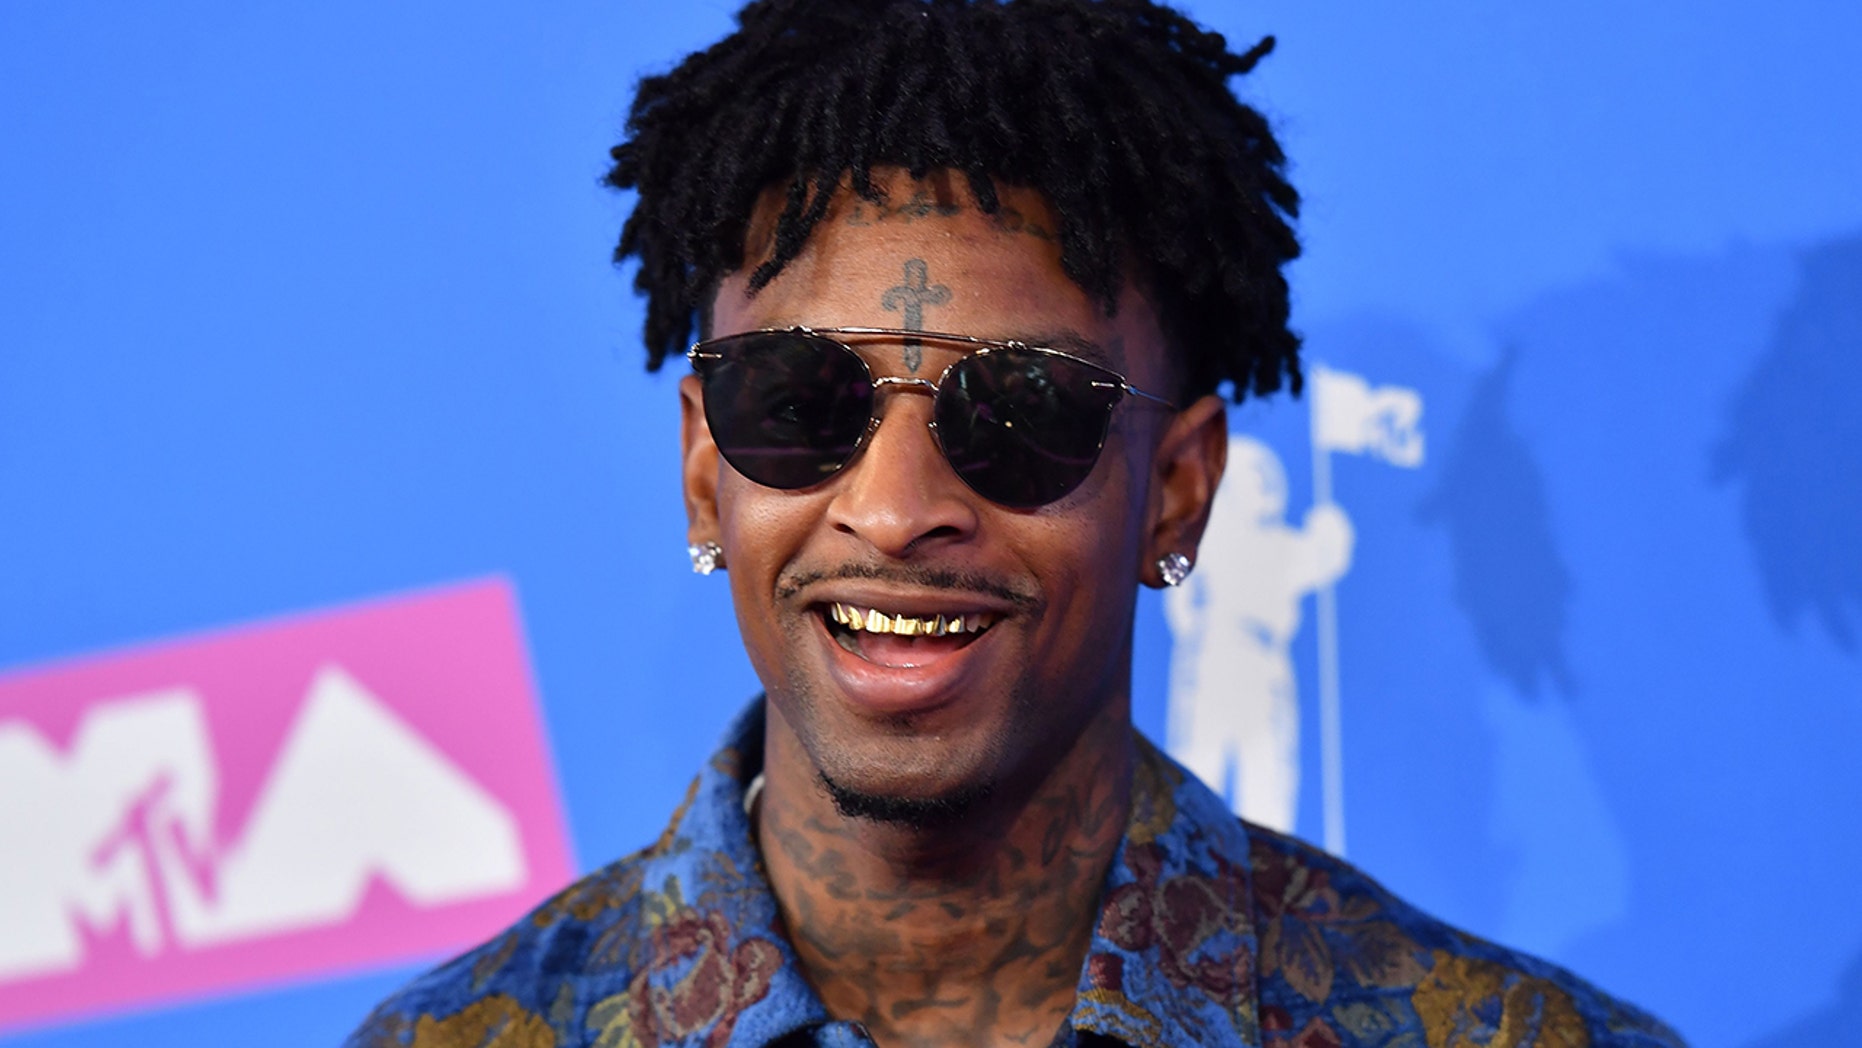 21 Savage’s attorney says client being ‘unnecessarily’ punished and intimidated: report